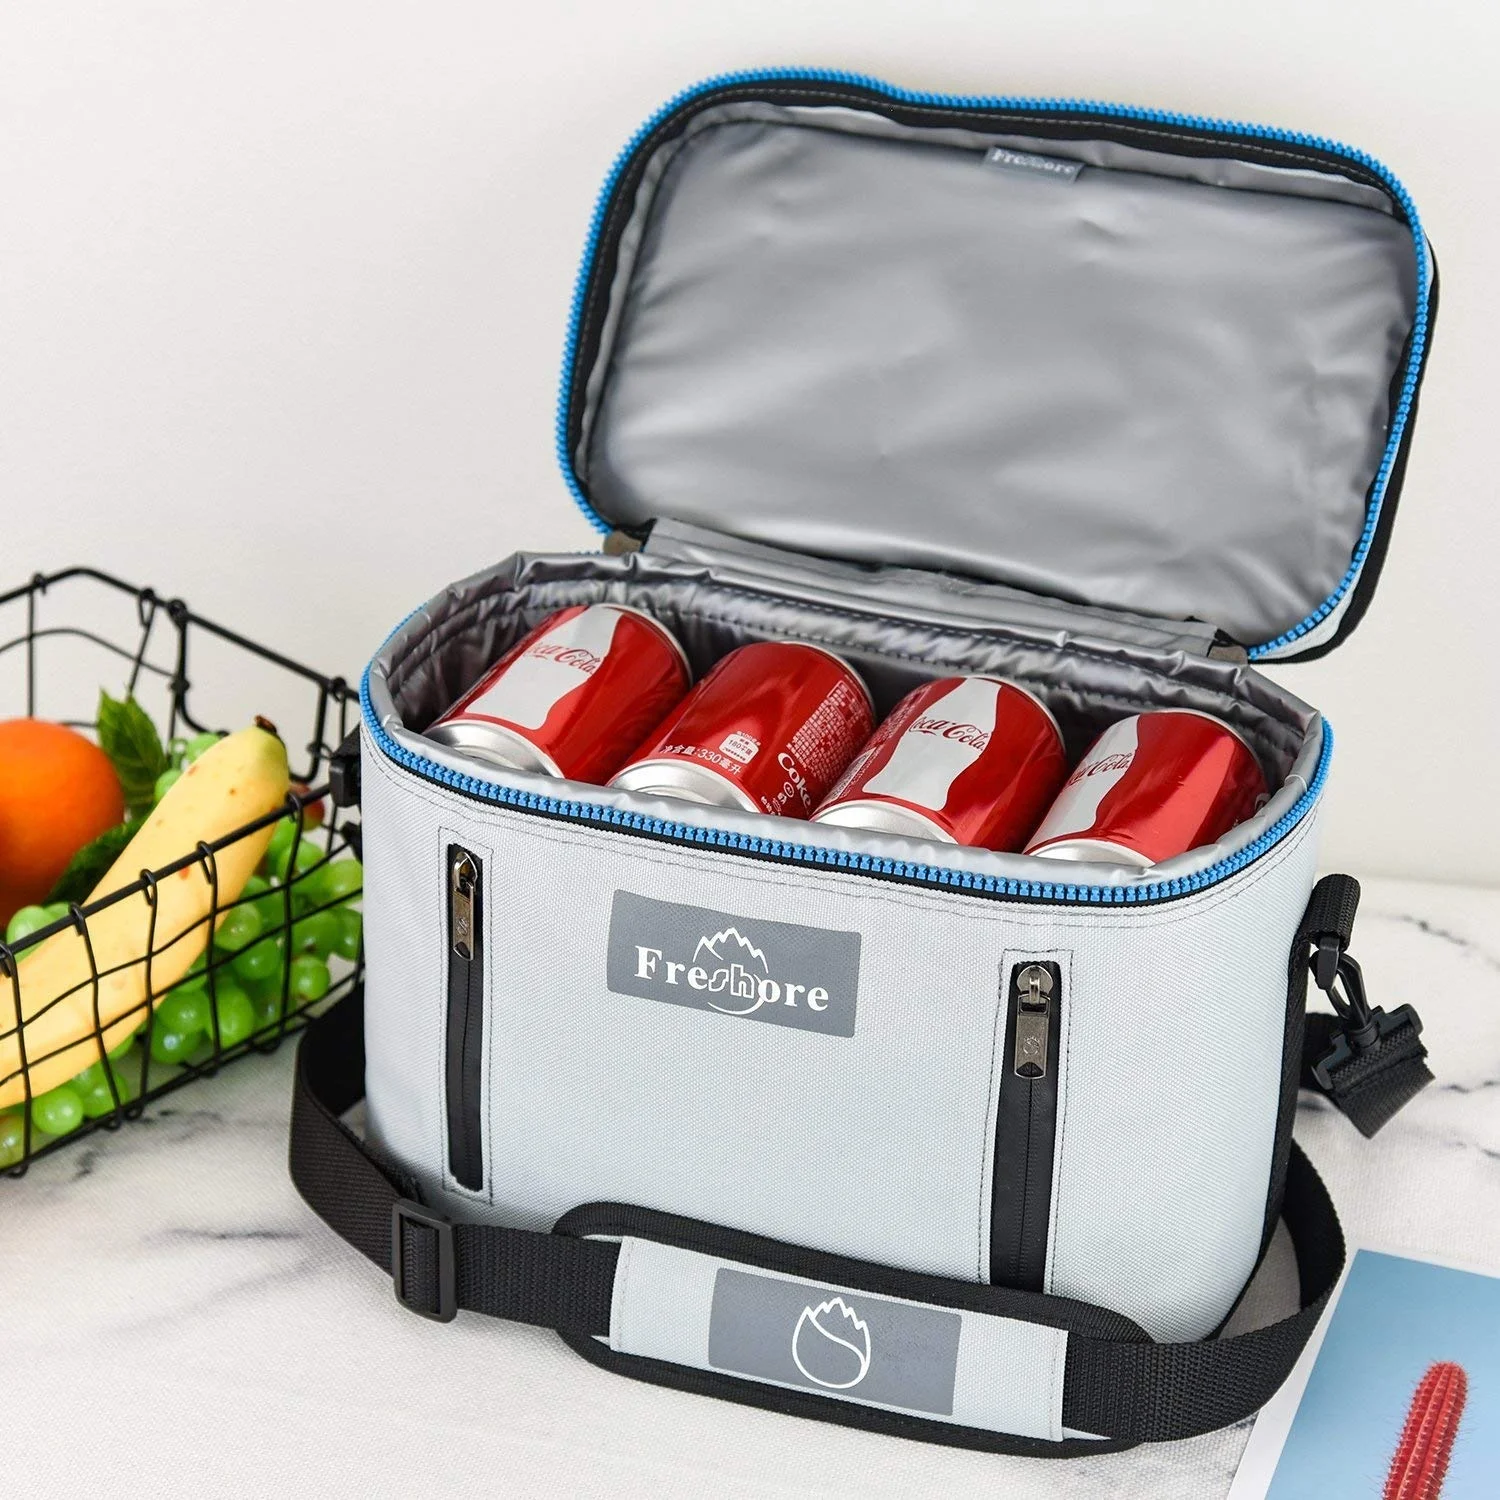 

Insulated Collapsible Soft Cooler Lunch Bag for Men, Small Travel Cooler for Camping, Family, BBQ, Picnic, Beach, bicycle, Can be customized